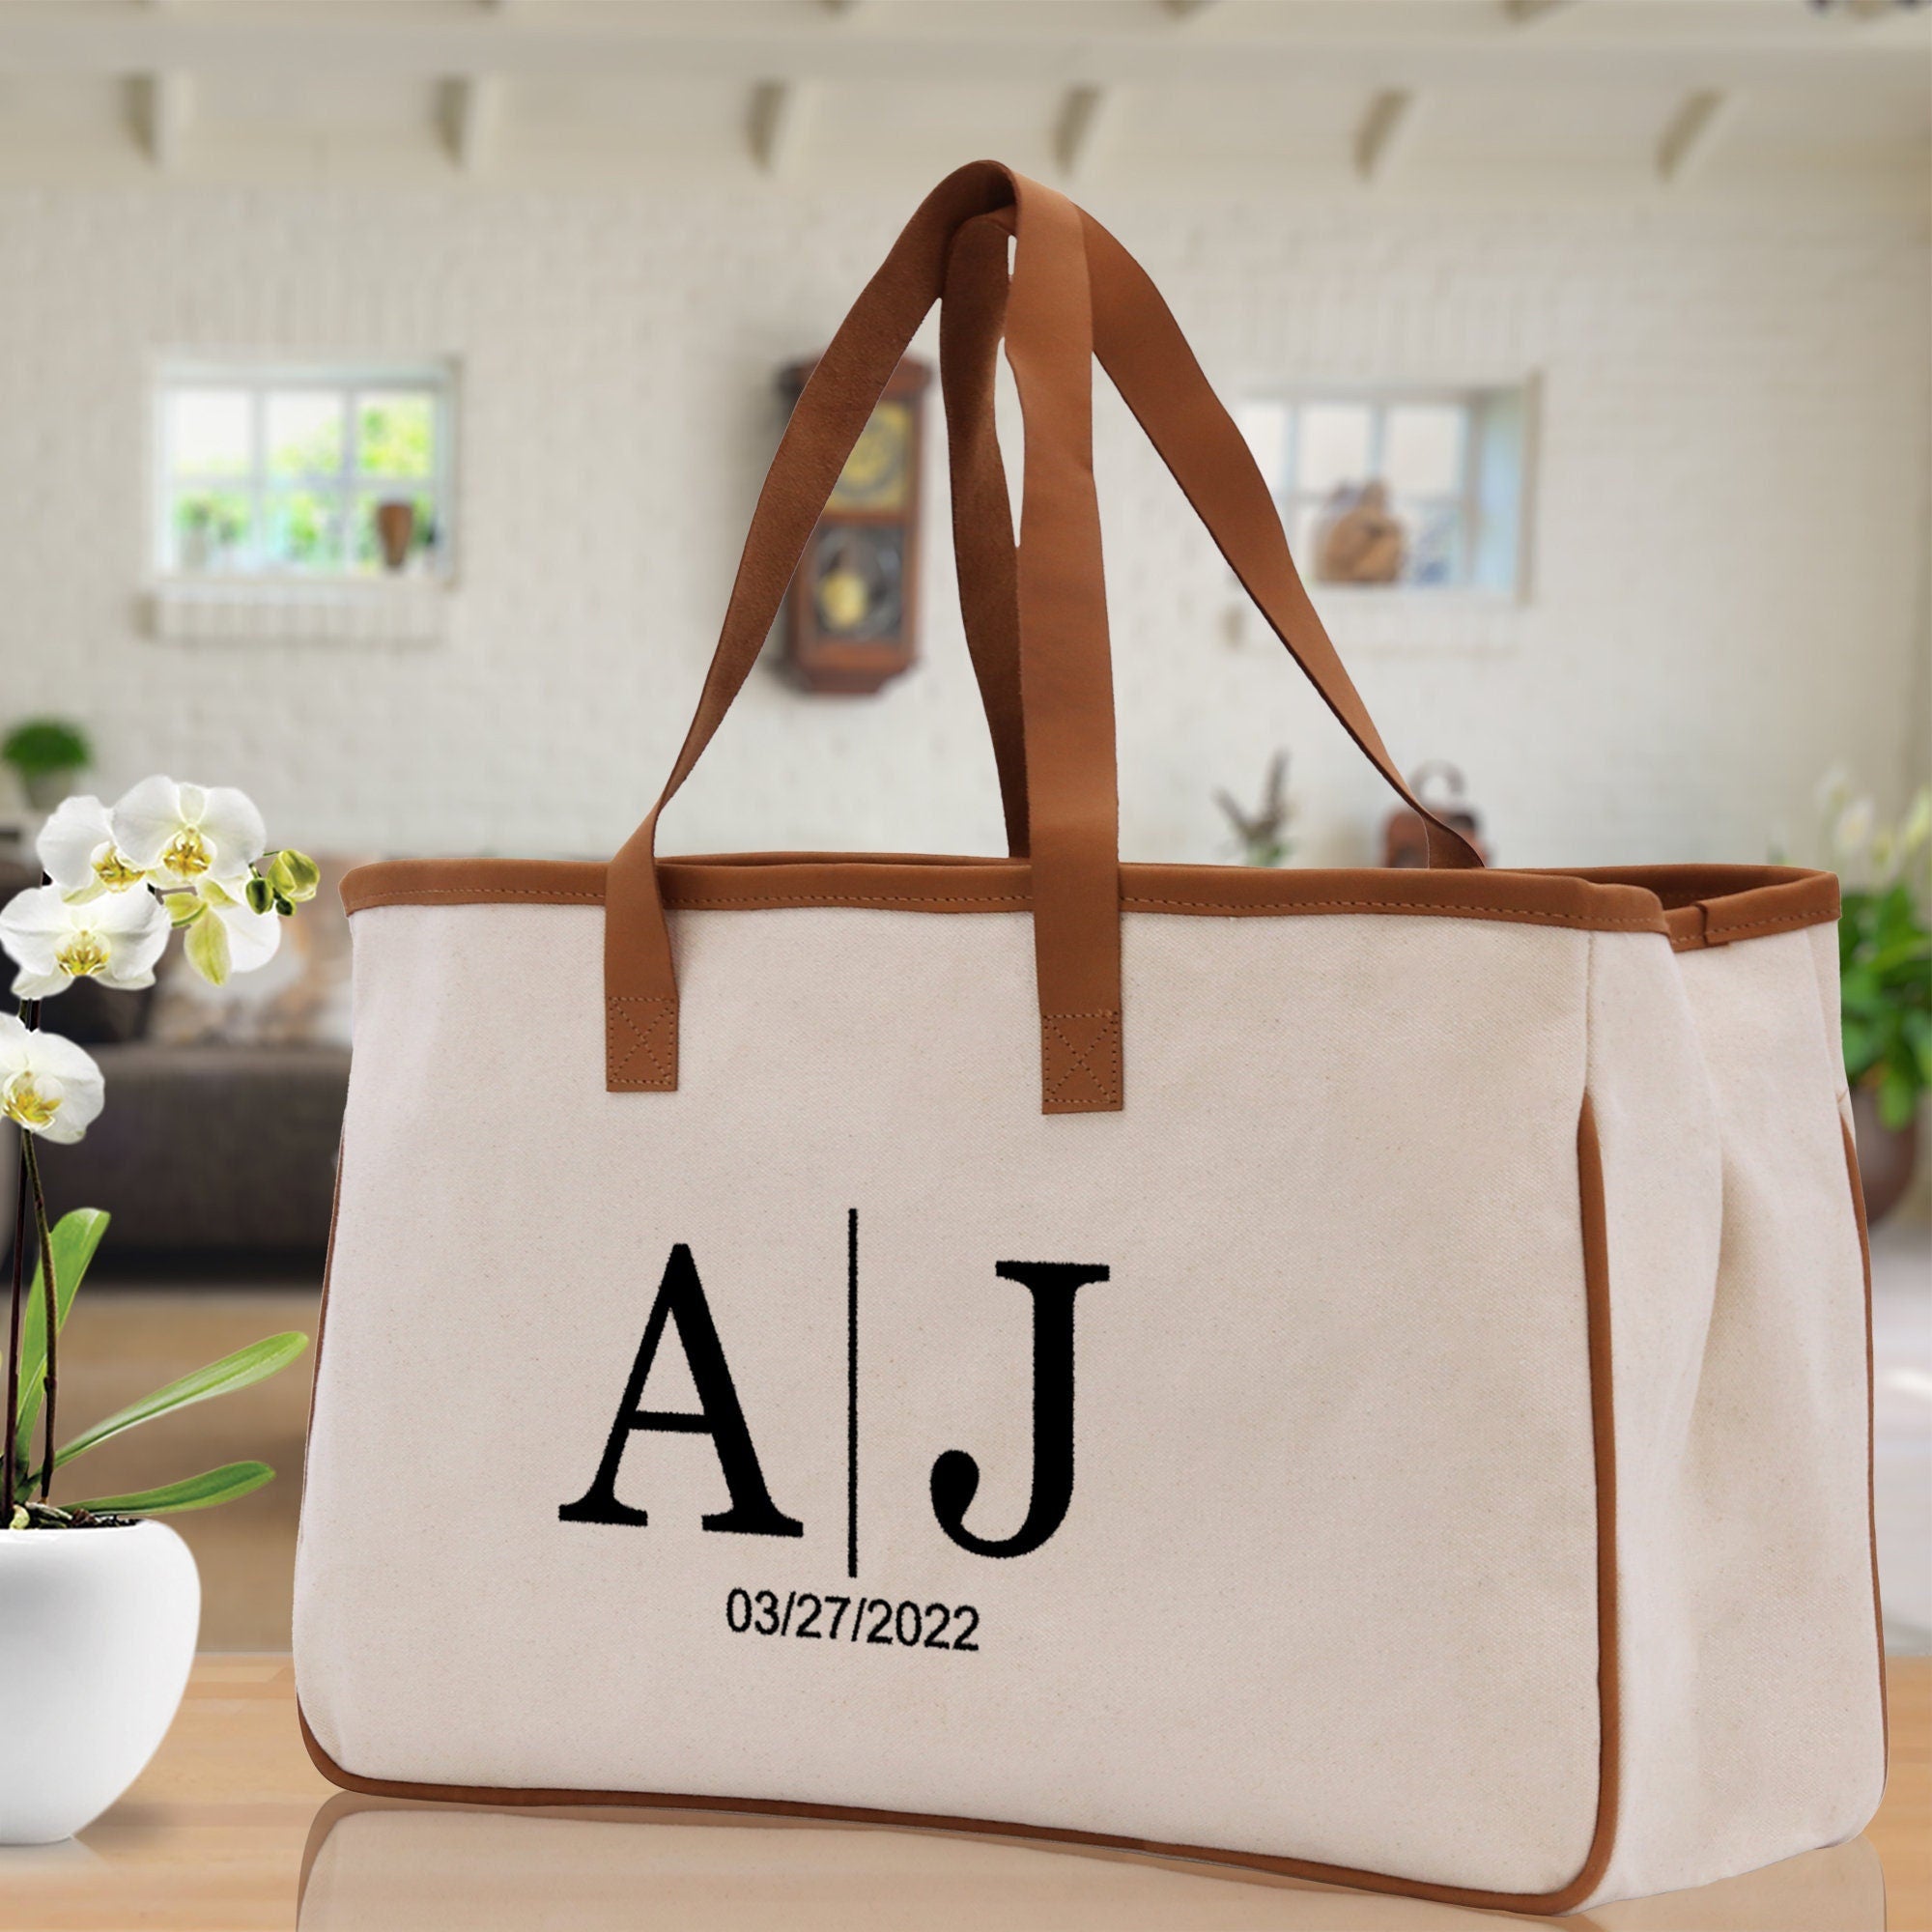 Initials and Date Customized Embroidered Tote Bag 100% Cotton Canvas and  Chic Personalized Tote Bag for Bridesmaid Anniversary Wedding Day